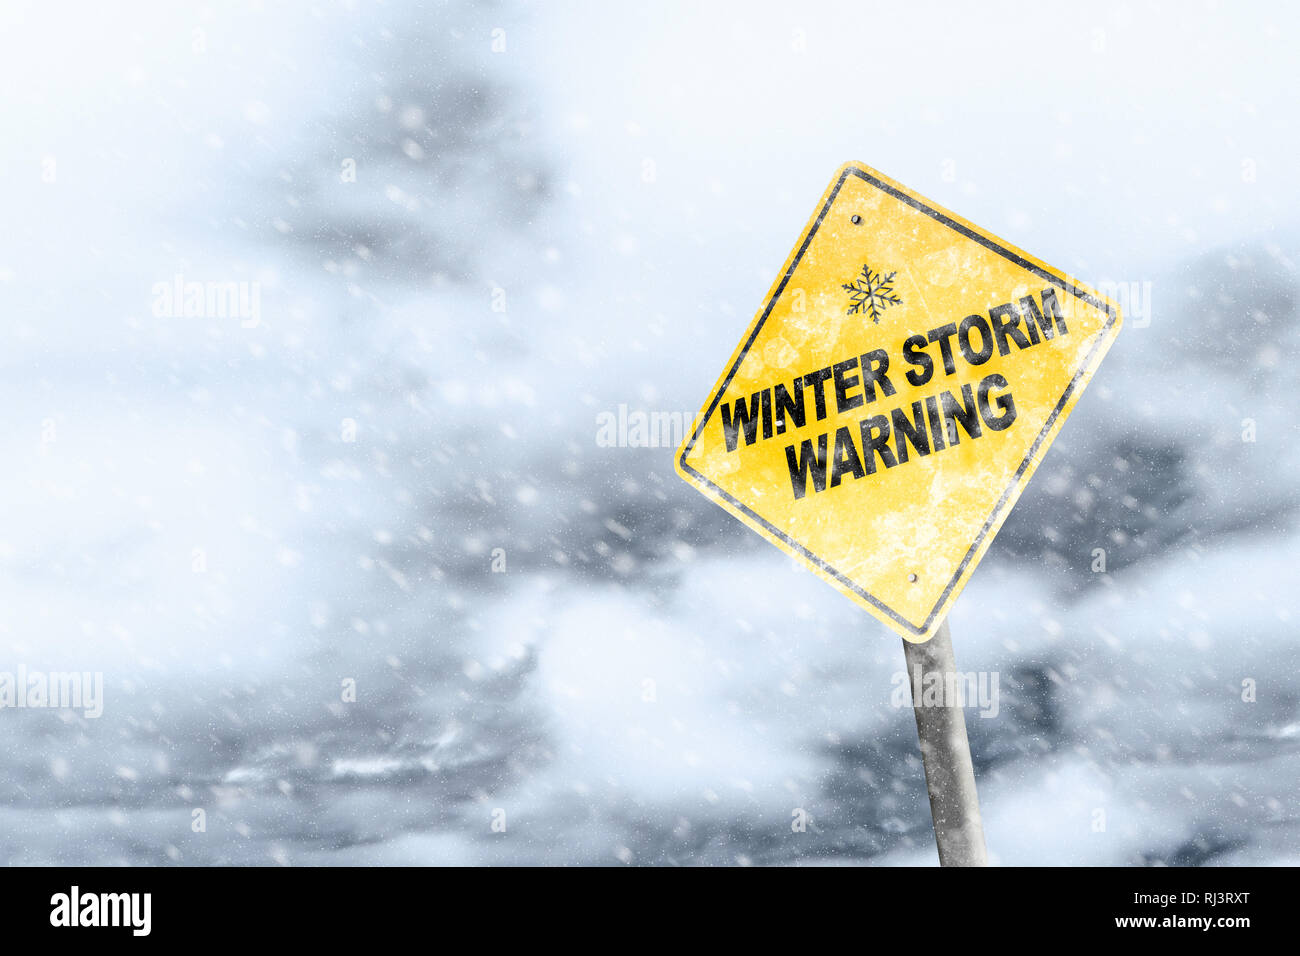 Winter storm season with snowflake symbol sign against a snowy background and copy space. Snow splattered and angled sign adds to the drama. Stock Photo